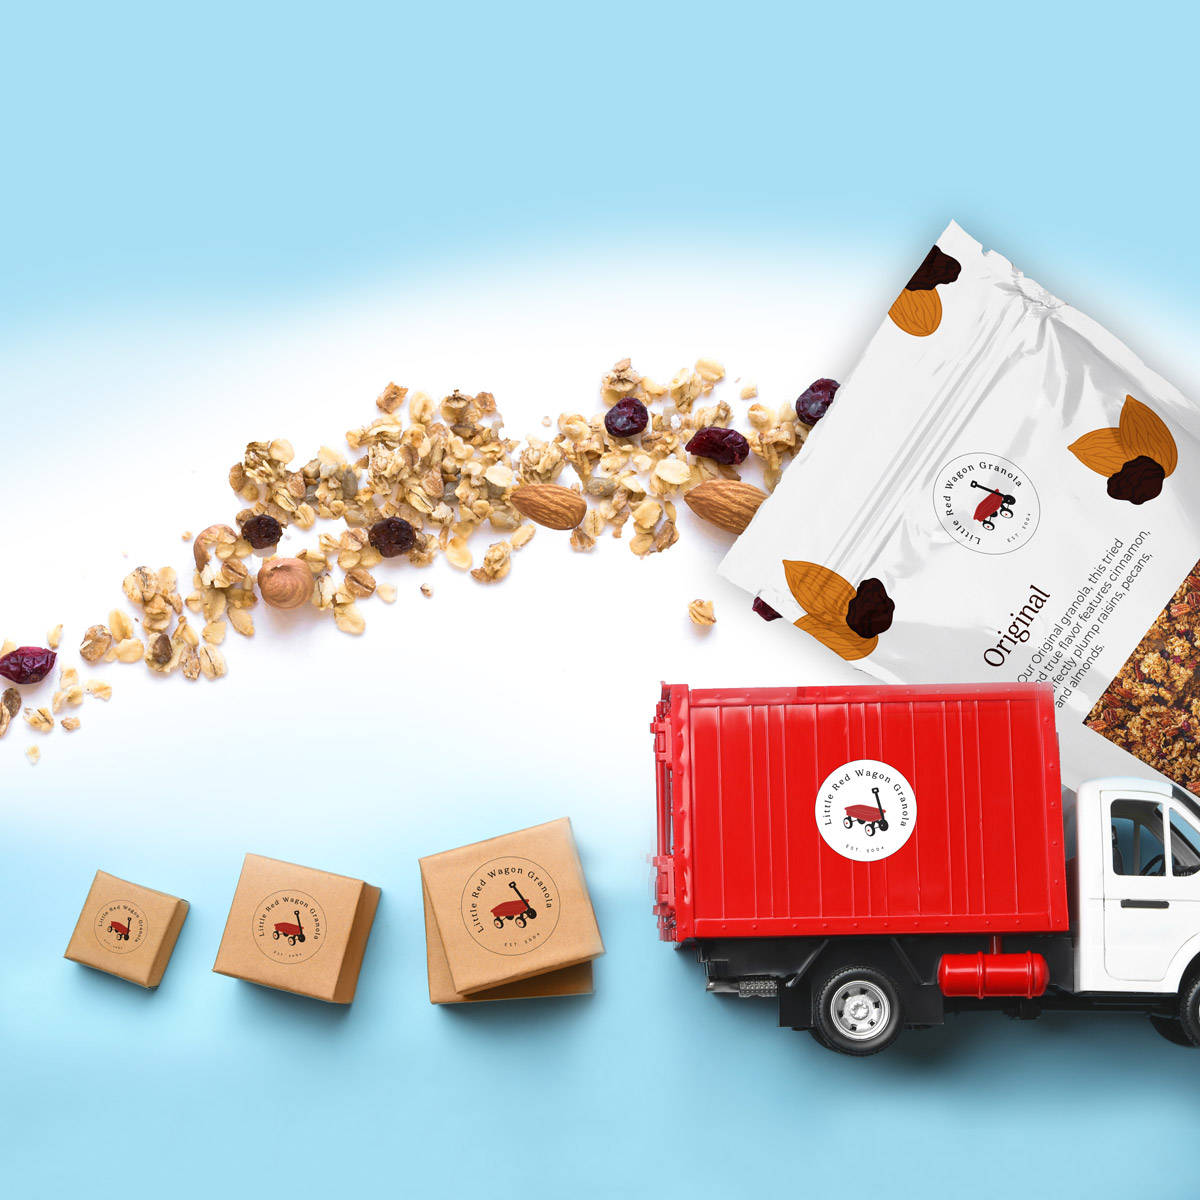 image showing little red wagon granola as a wholesale granola supplier, with a supply truck and tons of granola